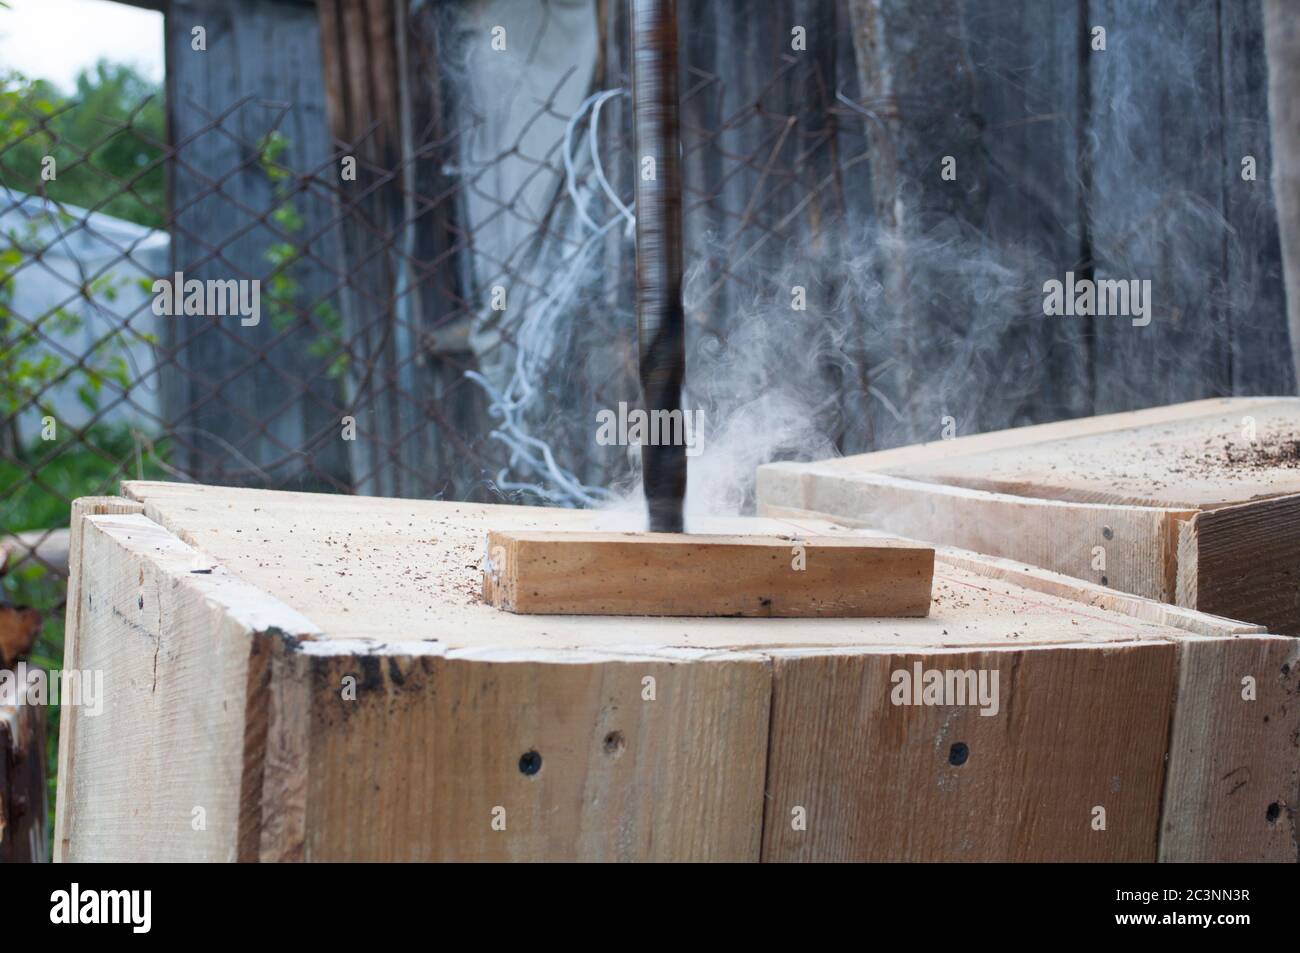 Drilling a hole in a wooden board at high speed there is smoke Stock Photo